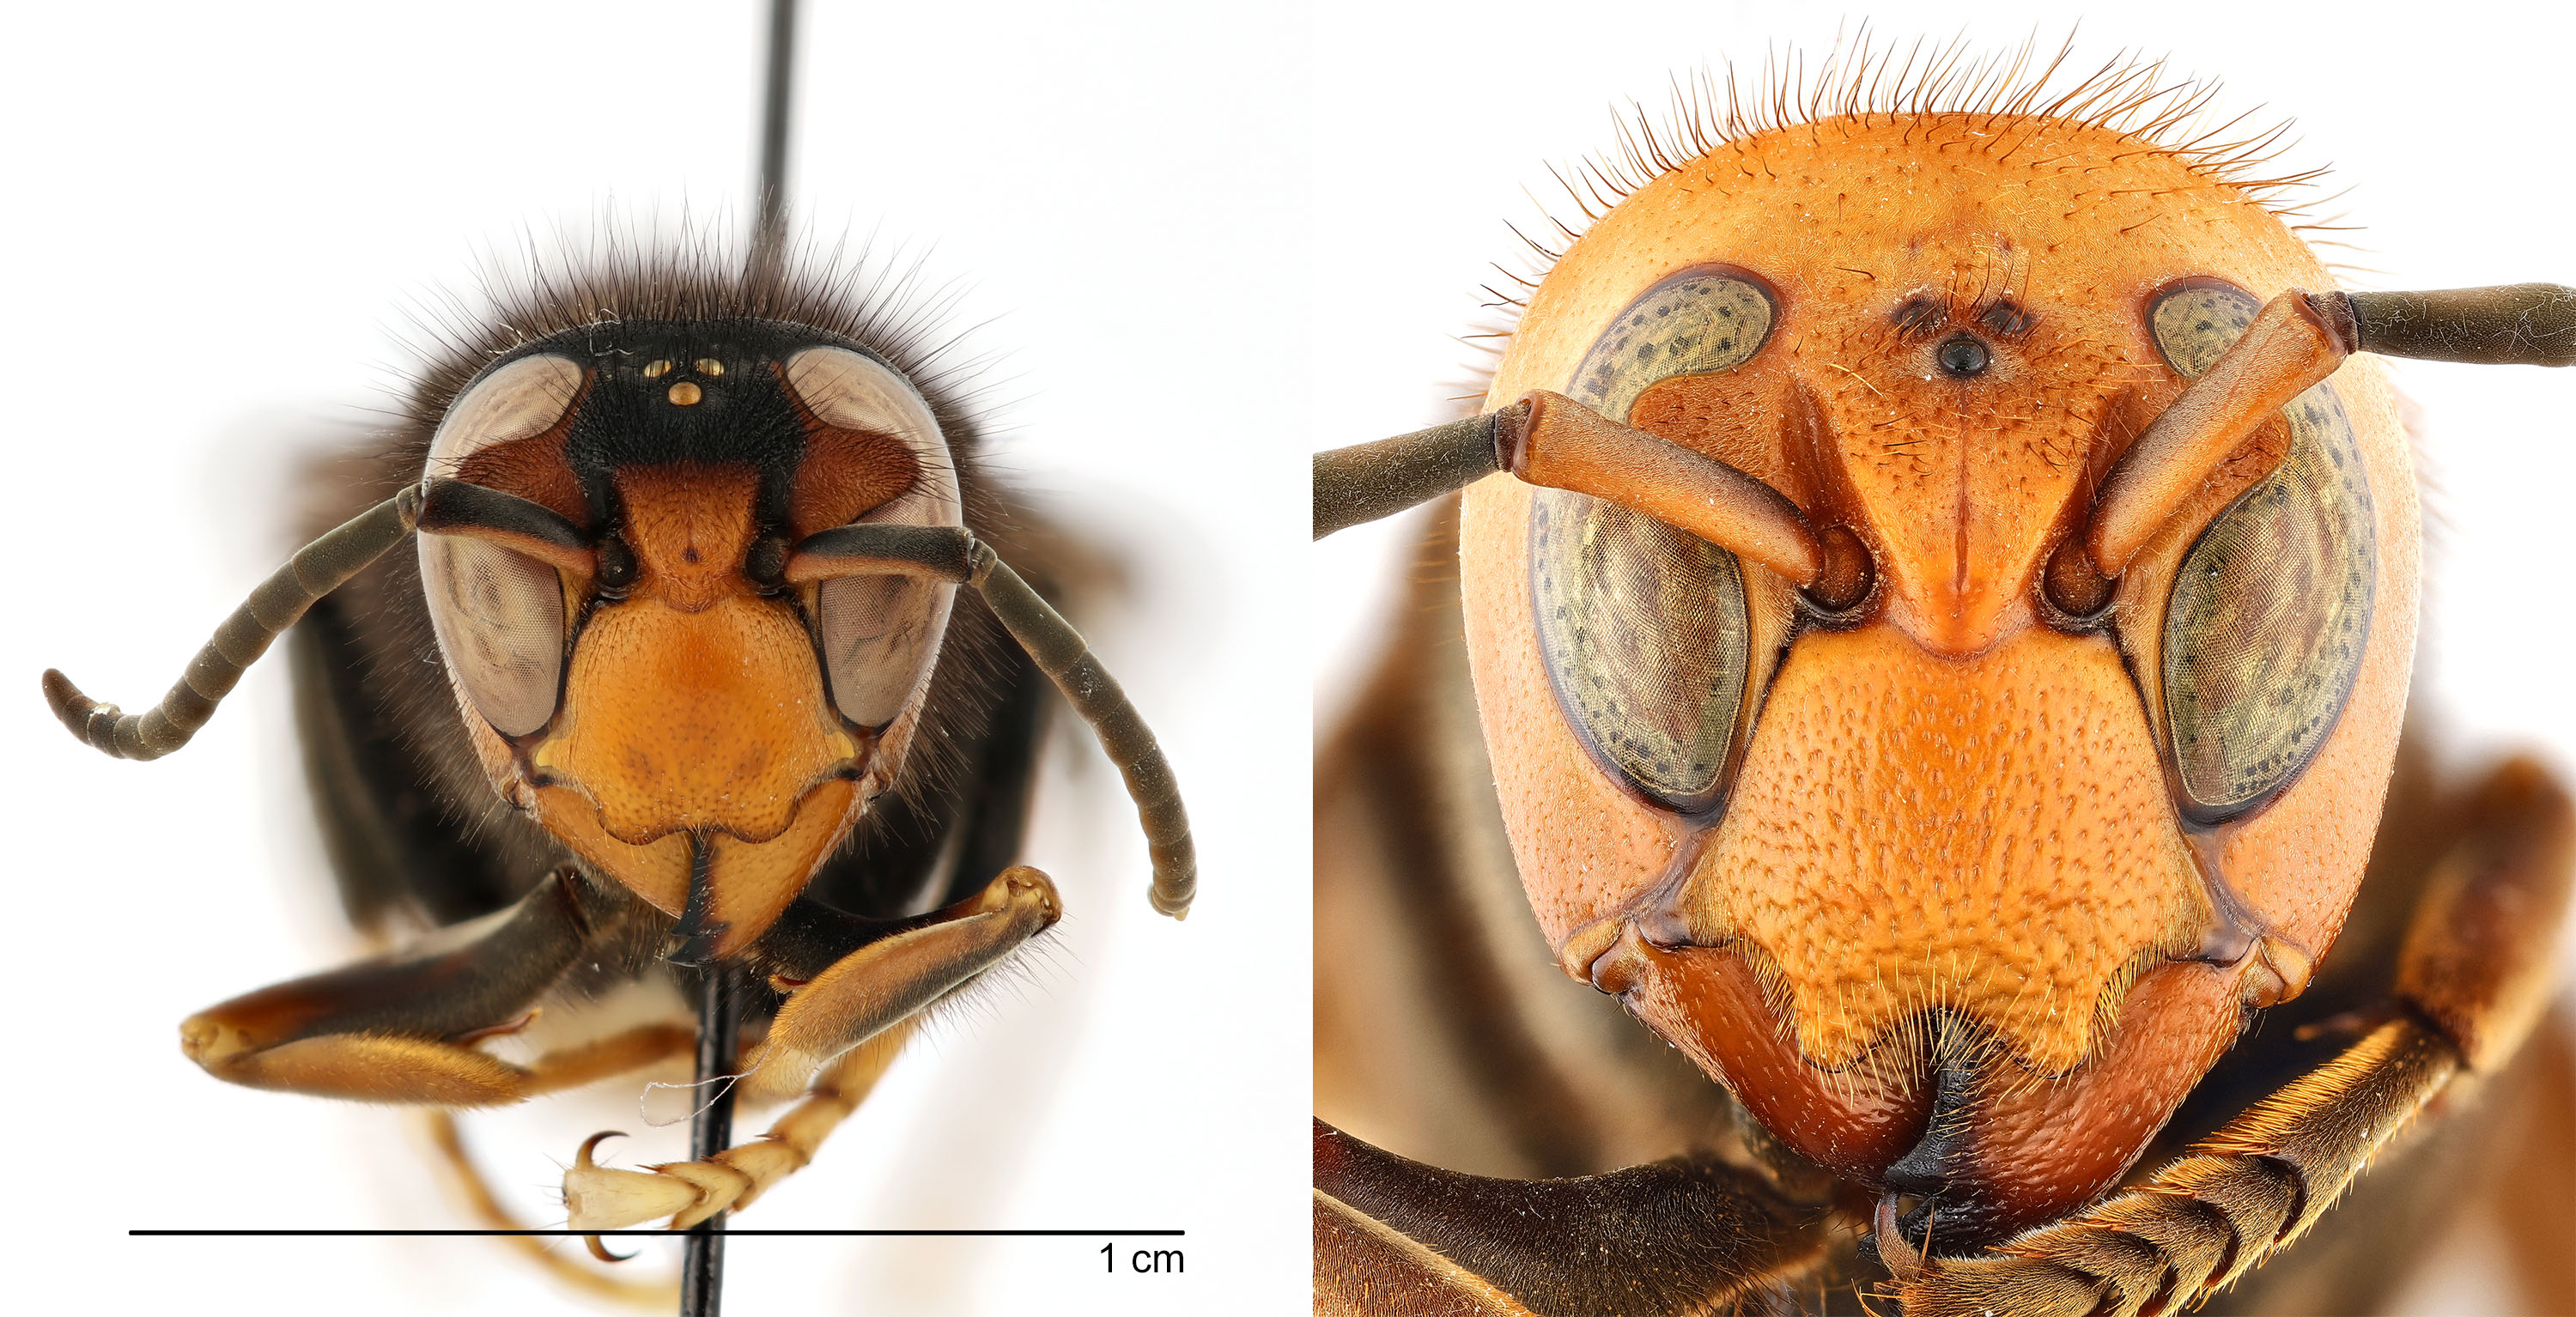   Vespa velutina  form " nigrithorax " face (left) compared to  Vespa mandarinia  face (right), dorsal view; photos by Hanna Royals and Todd Gilligan, USDA APHIS PPQ ITP 
